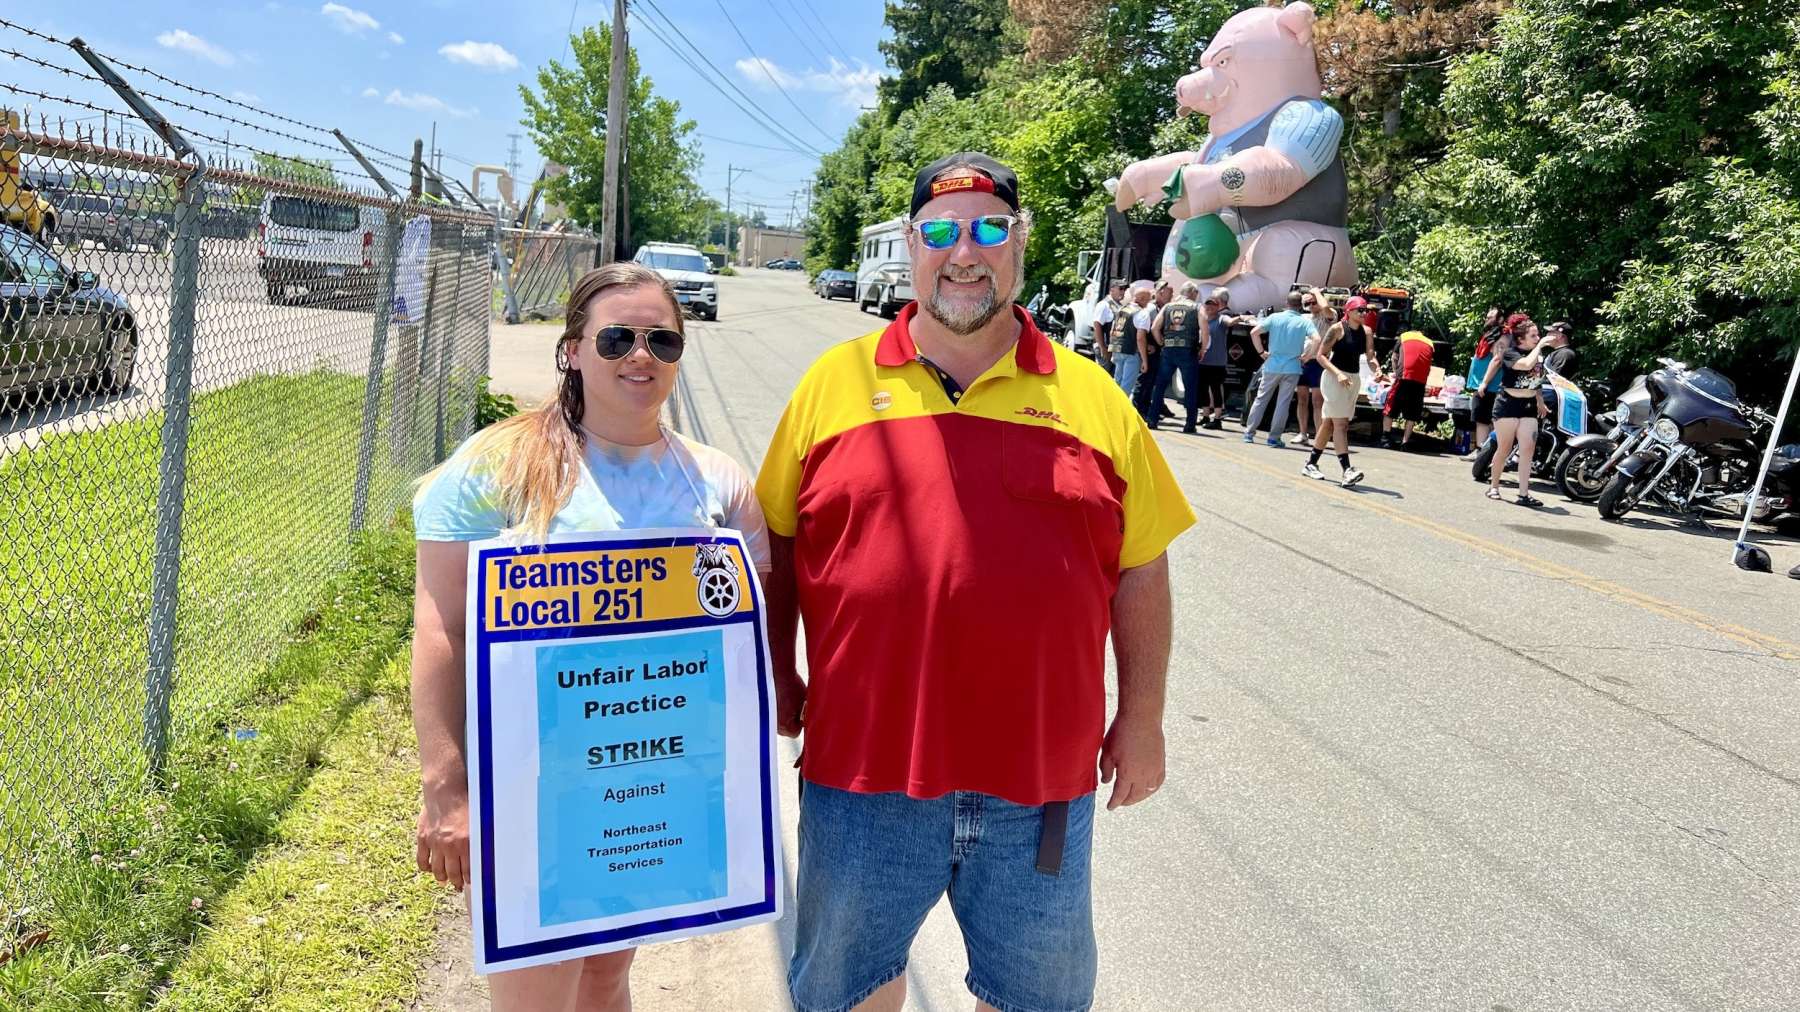 DHL workers in Pawtucket striking for livable wages and healthcare